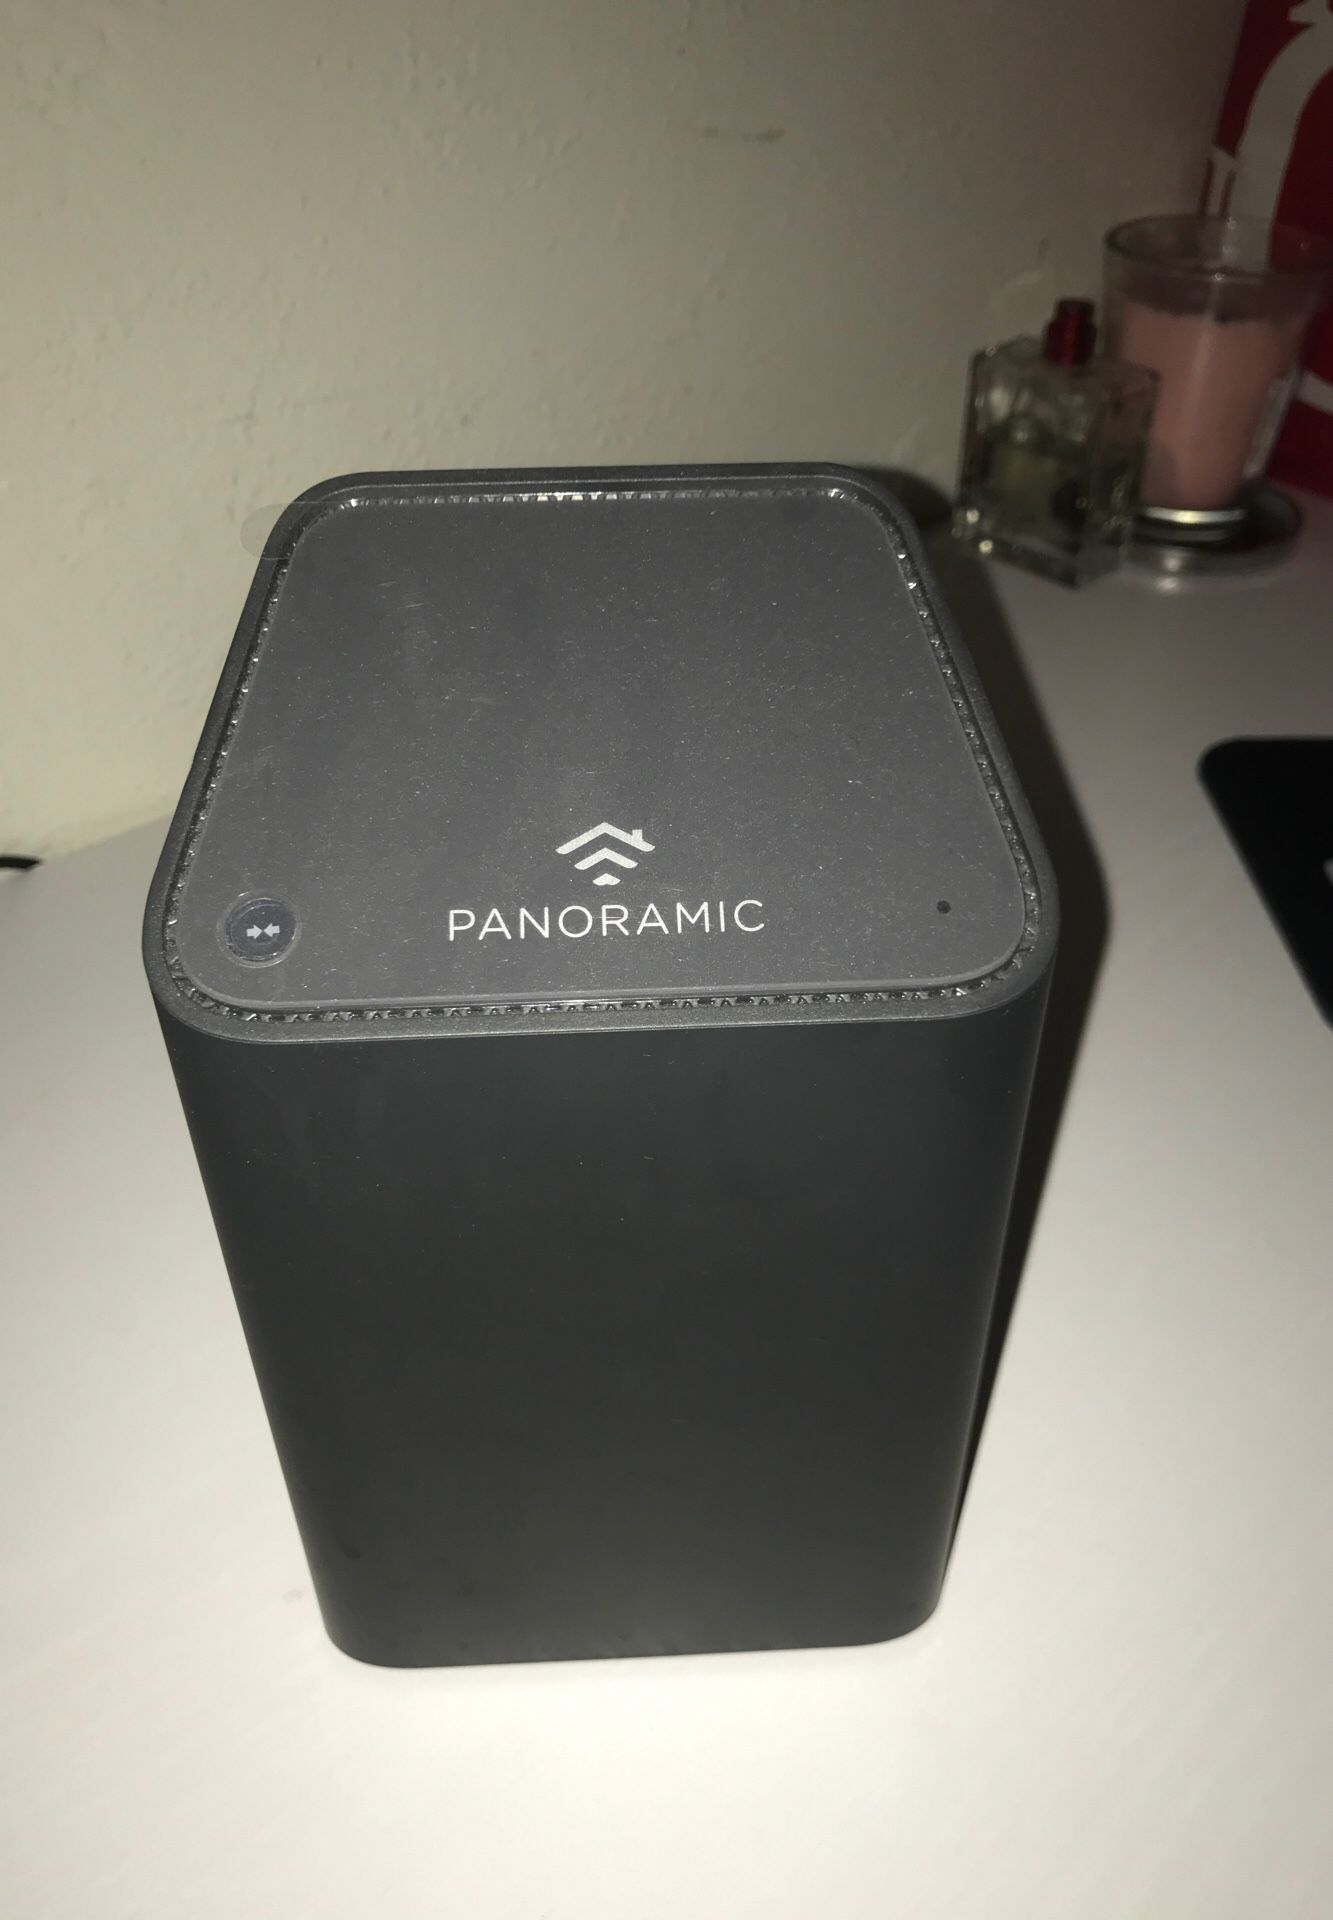 Panoramic Wifi Modem/Router